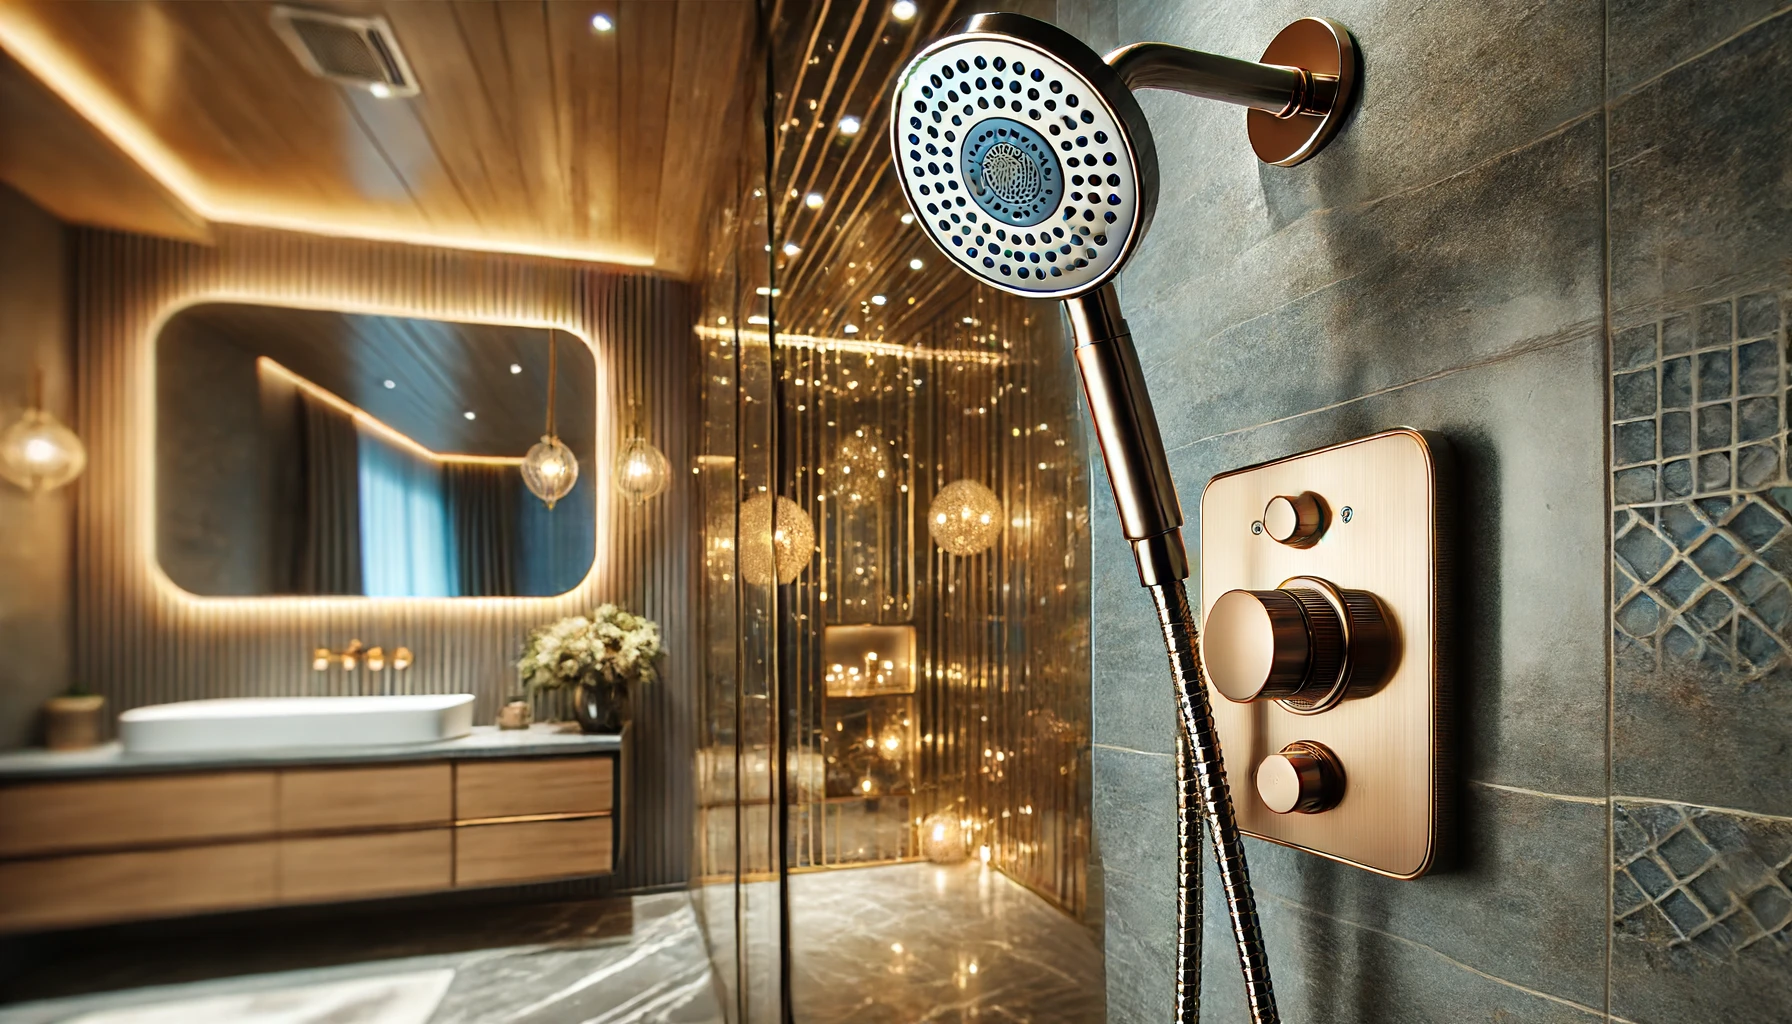 A popular luxury handheld shower head installed in a modern, stylish bathroom. The focus is on the shower head's elegant design, advanced features, and the high-end ambiance of the bathroom.